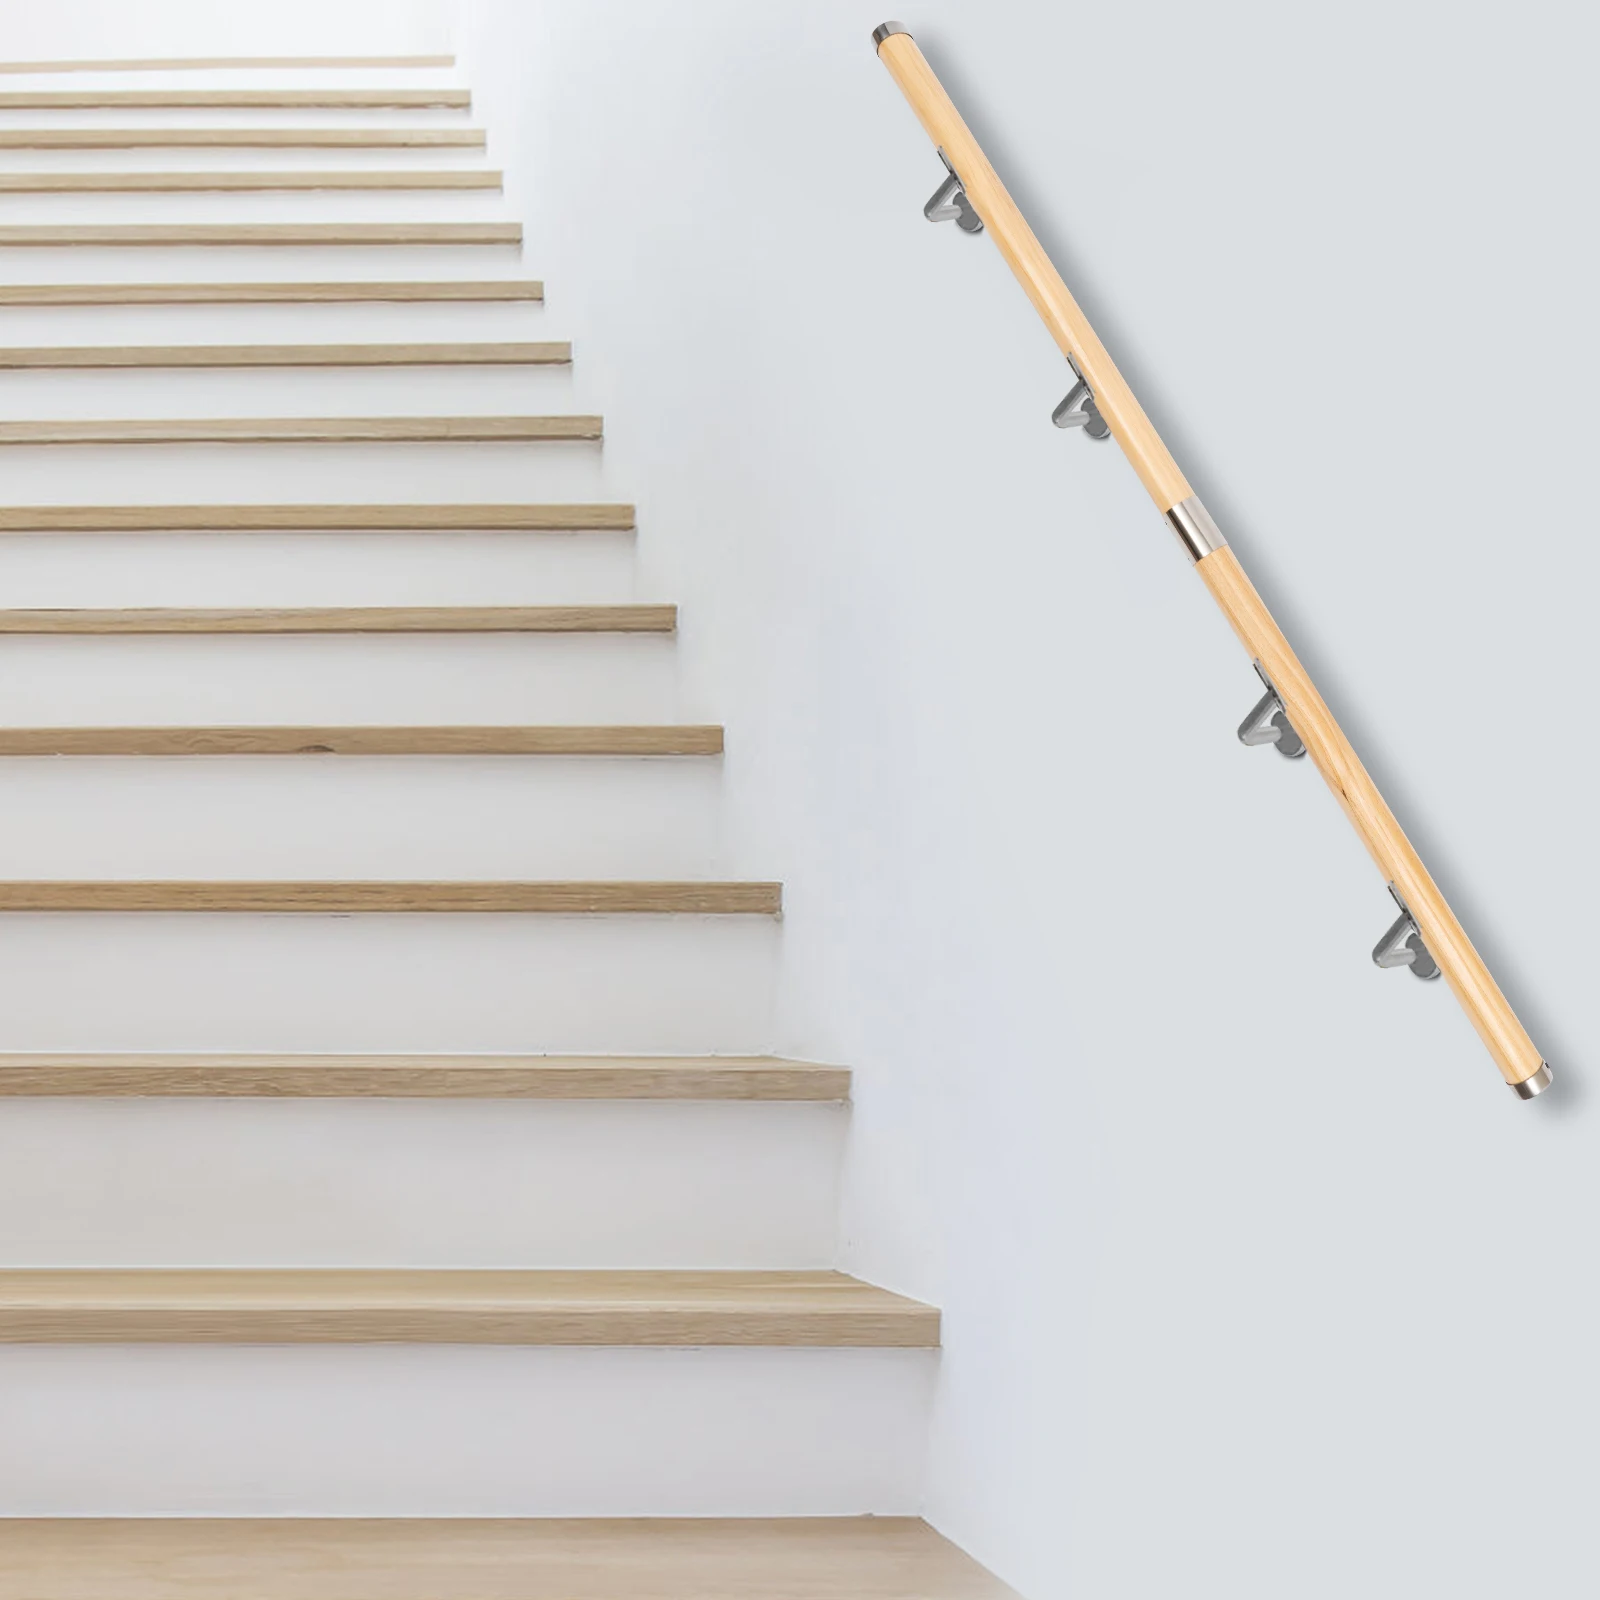 66ft-5ft-wooden-pvc-handrail-solid-wood-stairs-anti-slip-wall-safety-corridor-rail